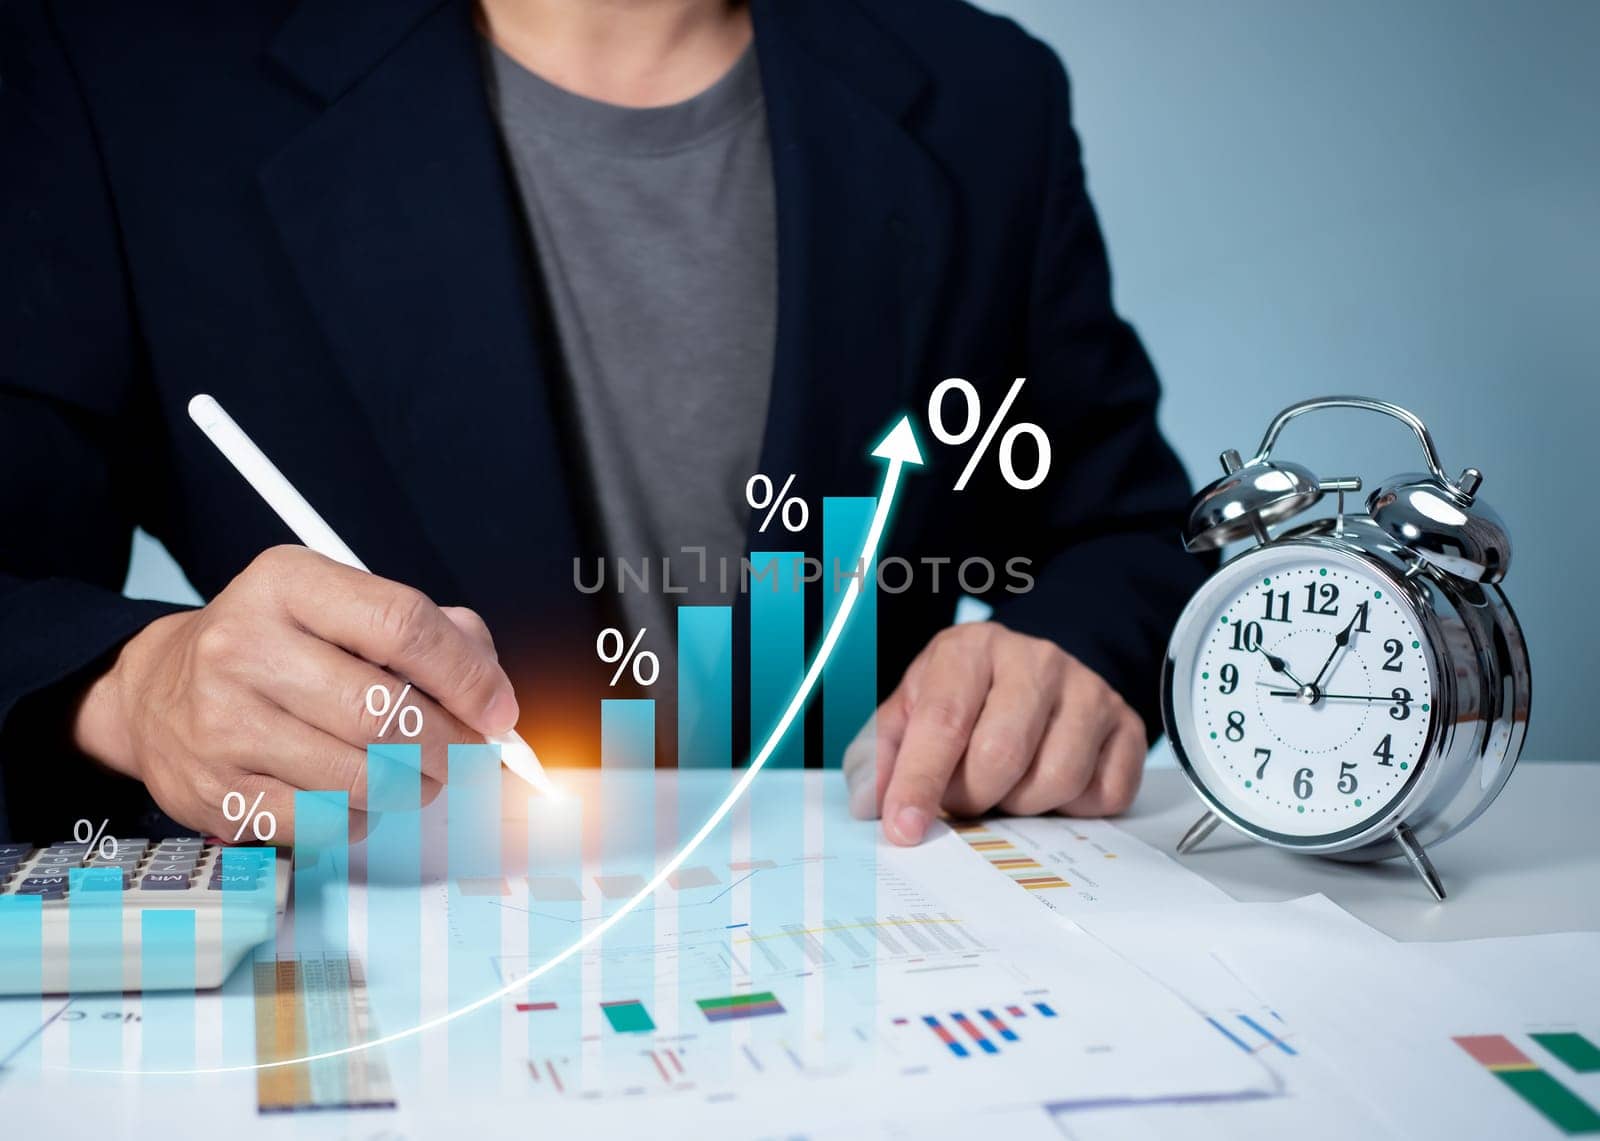 Stock market, Business growth, progress or success concept. Businessman or trader is showing a growing virtual hologram stock, invest in trading. by Unimages2527